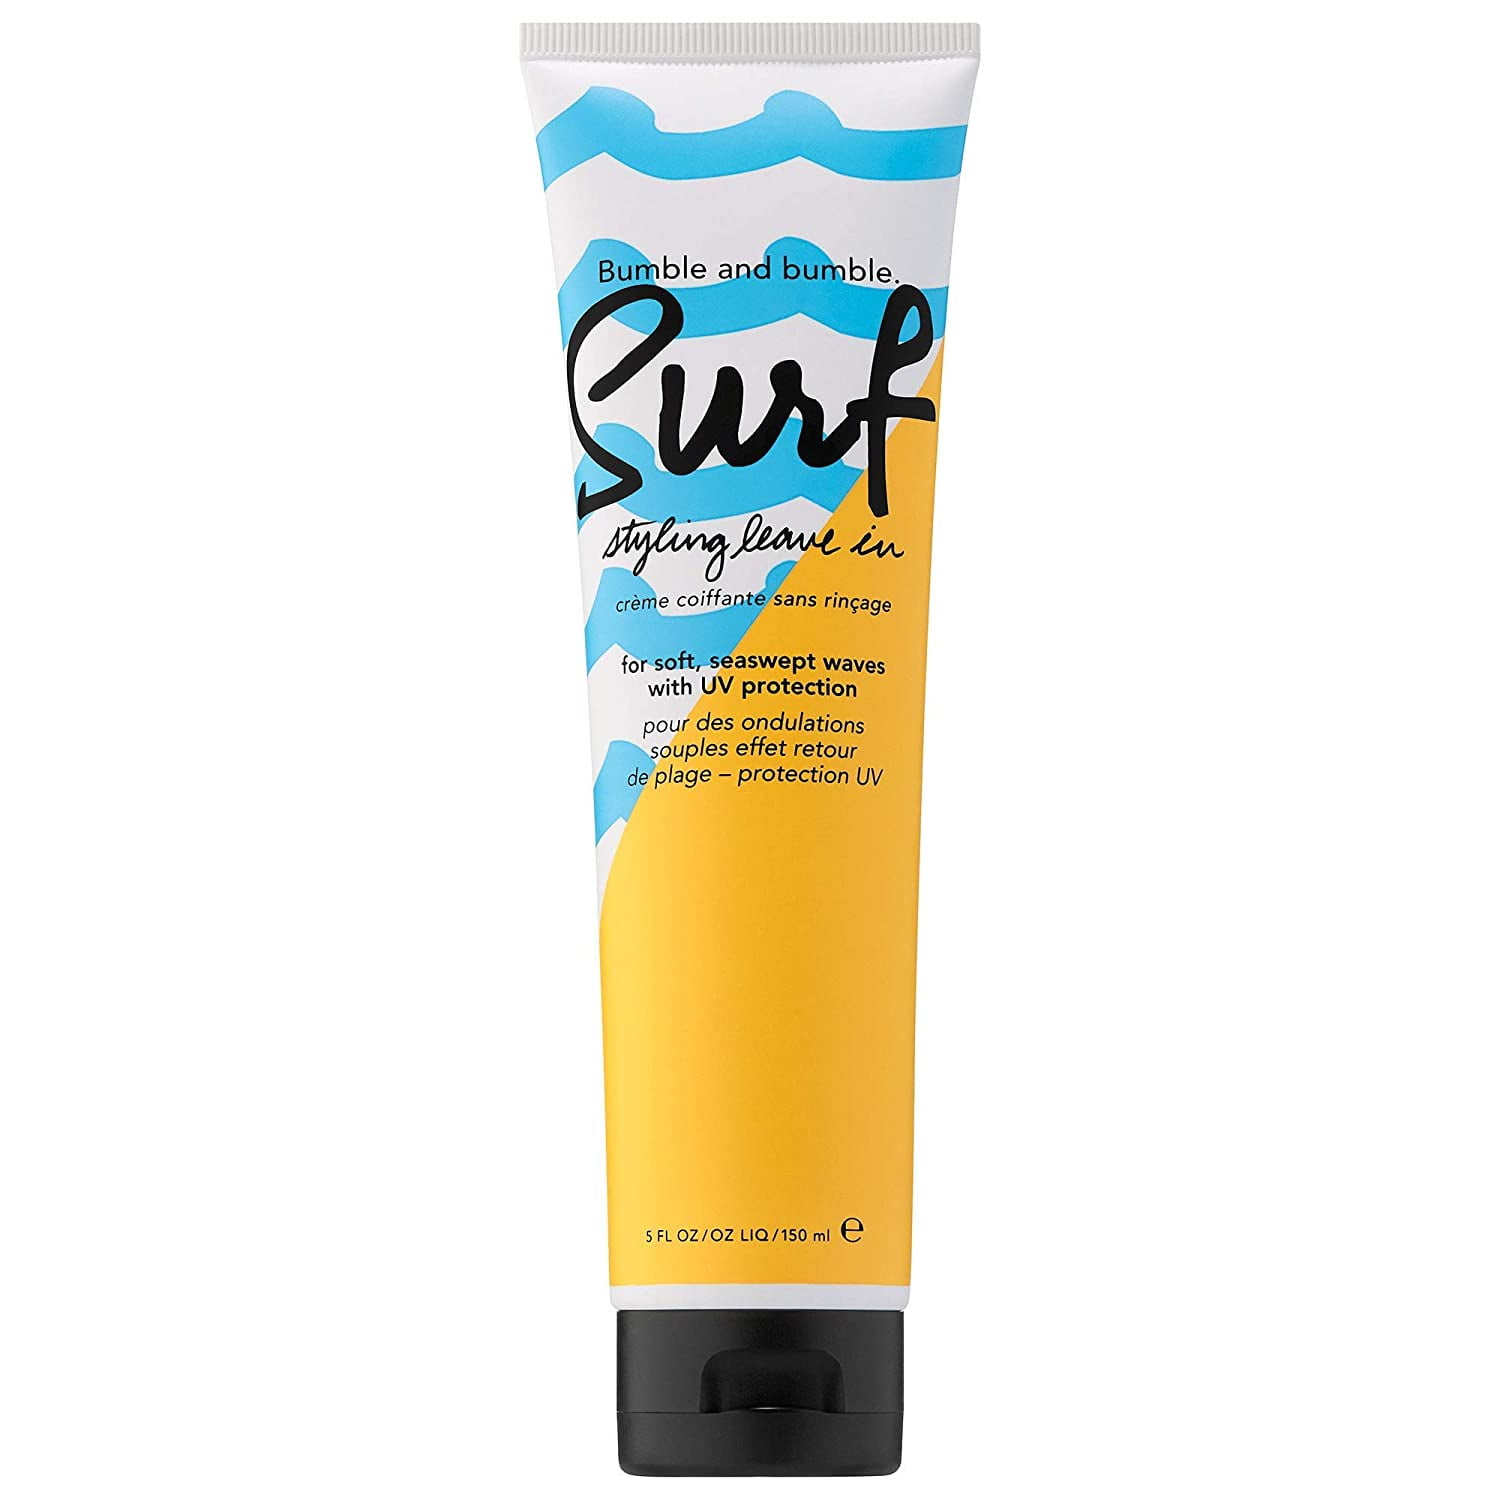 Bumble and Bumble Surf Styling Leave In, Full Size, 5 Oz -